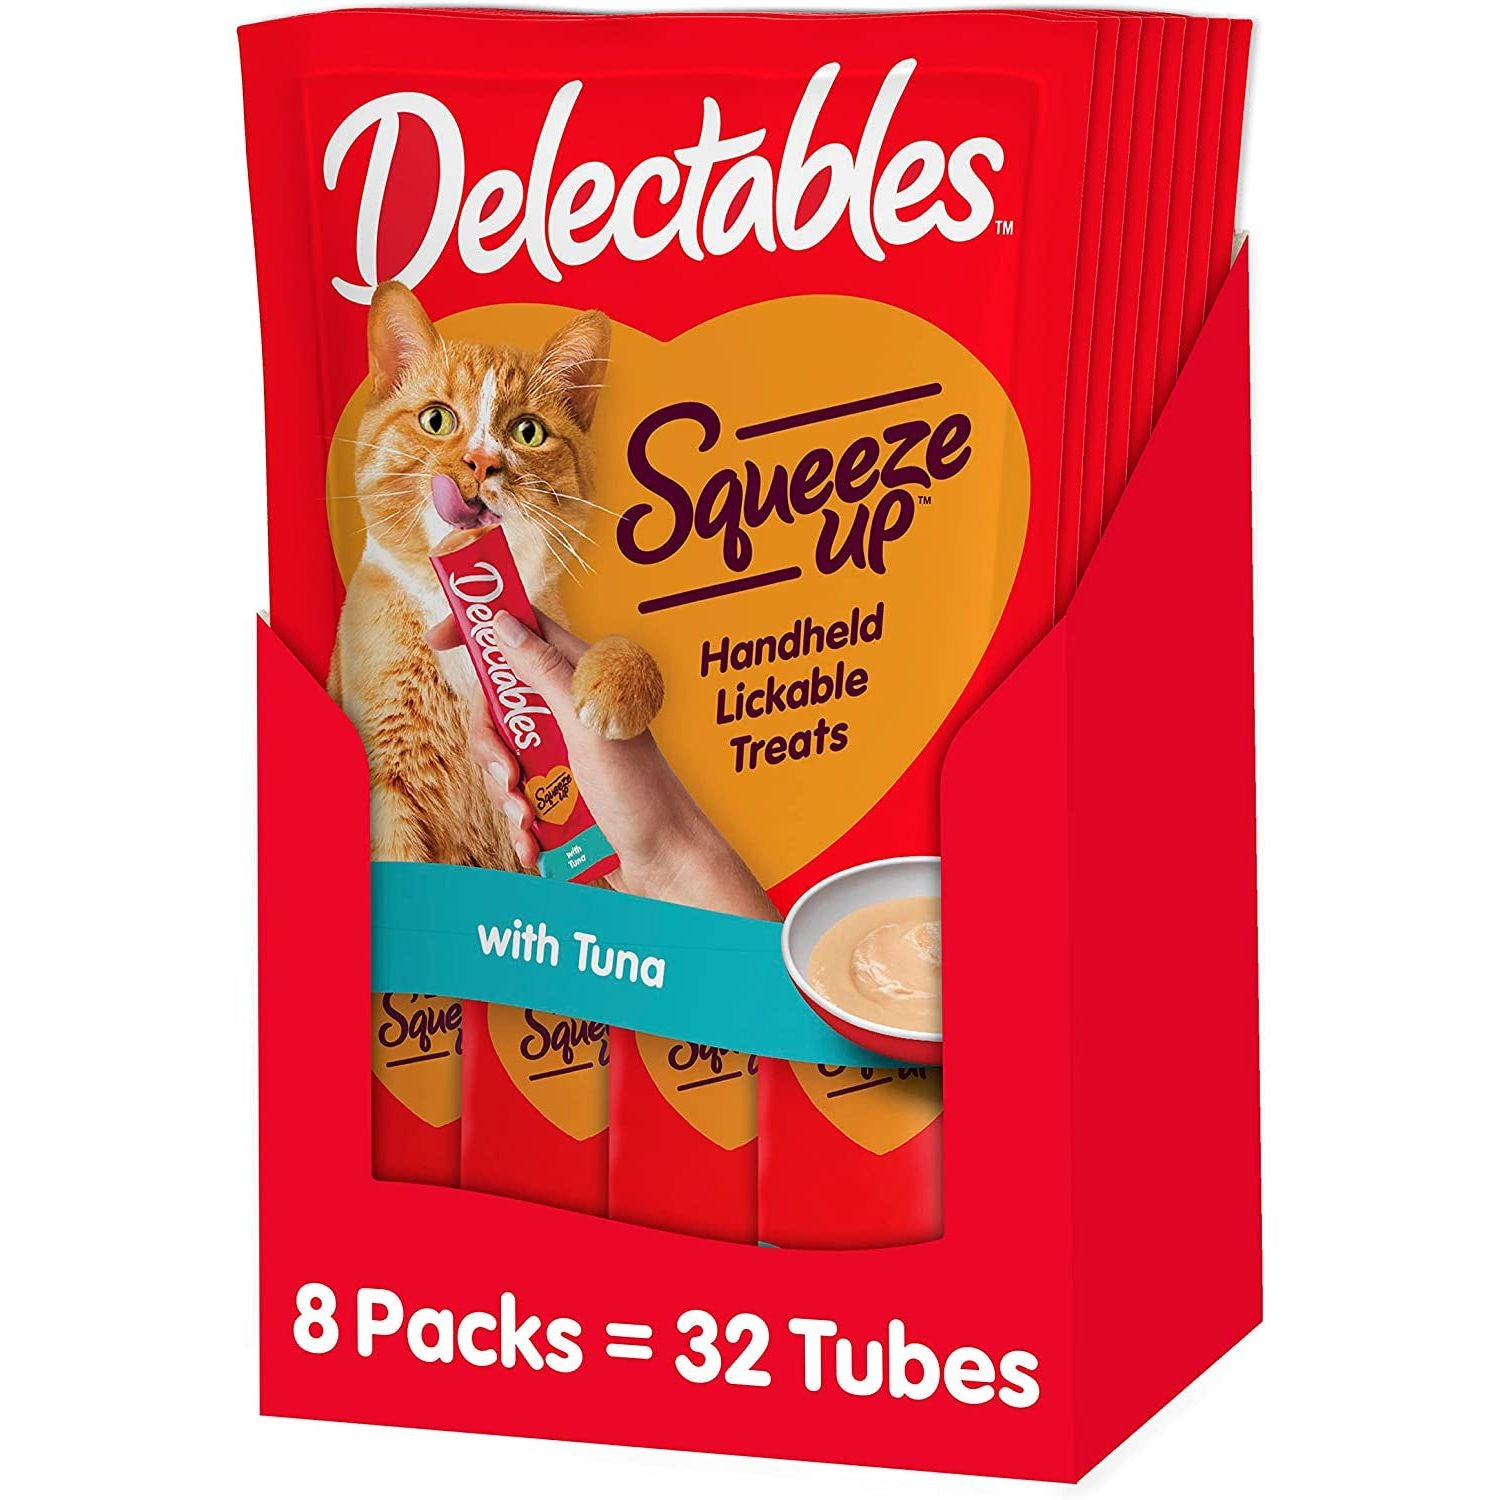 Delectables Squeeze Up